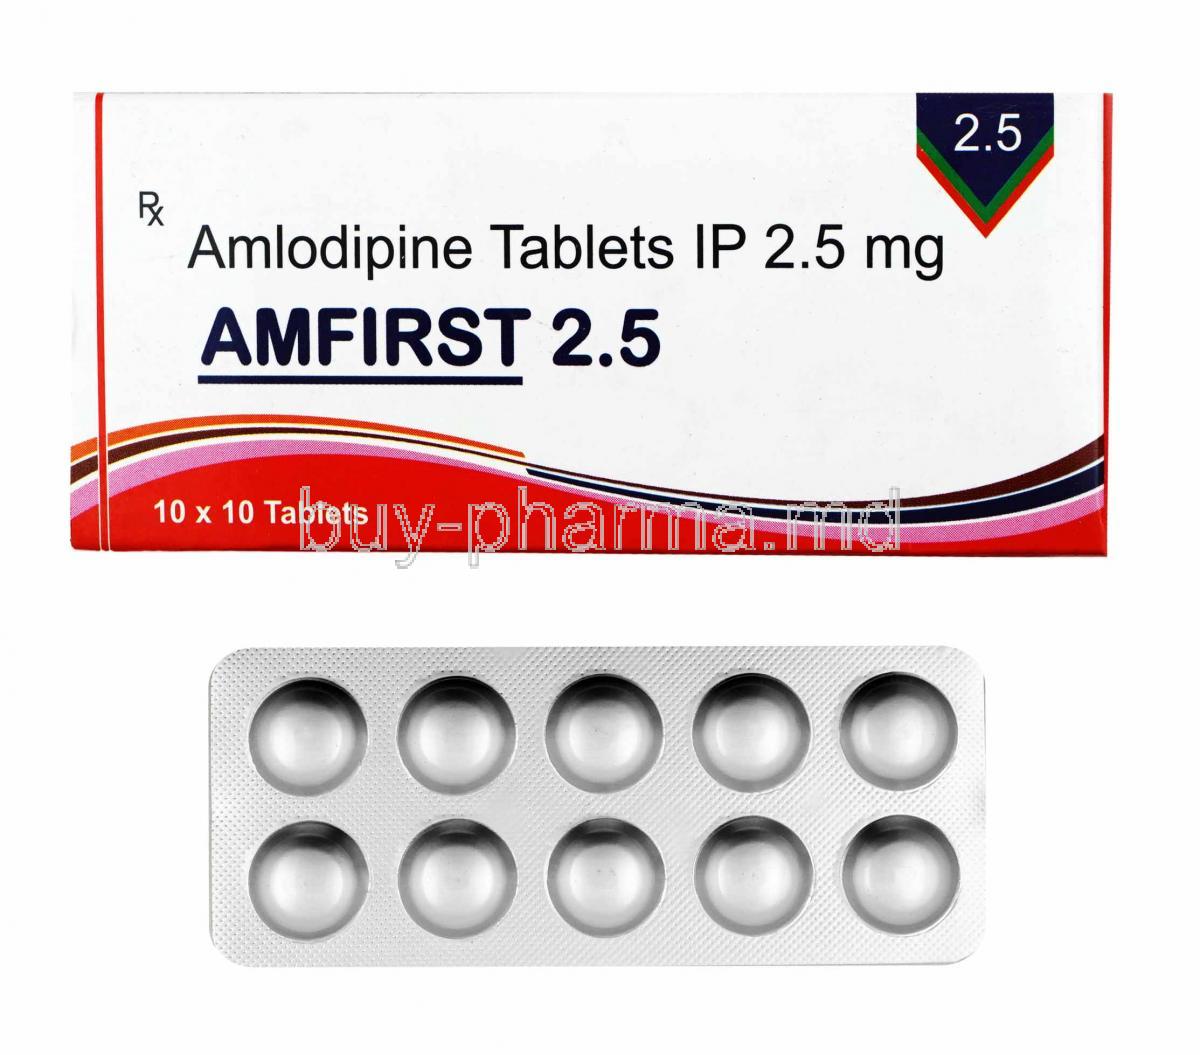 what is the generic name of amlodipine